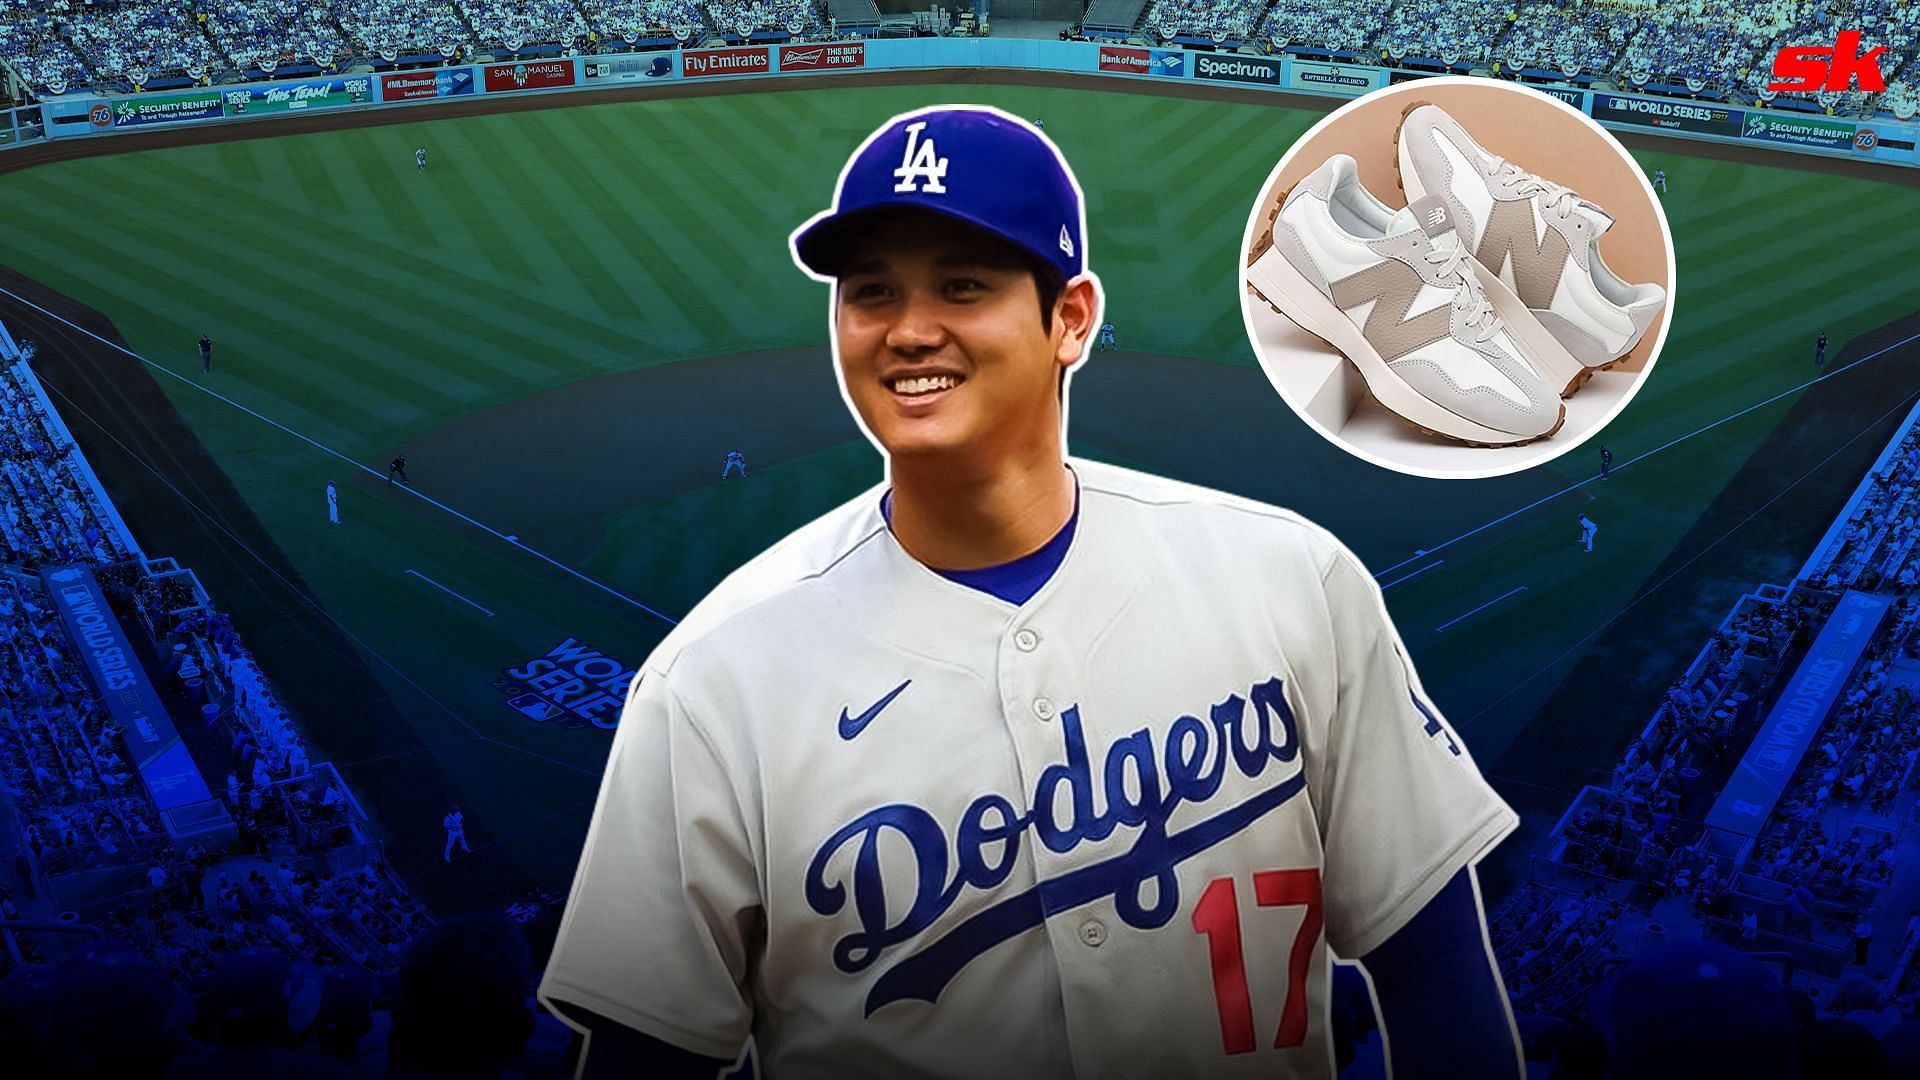 Shohei Ohtani rocks unreleased custom New Balance SO1 cleats as part of his gear for Dodgers Spring Training